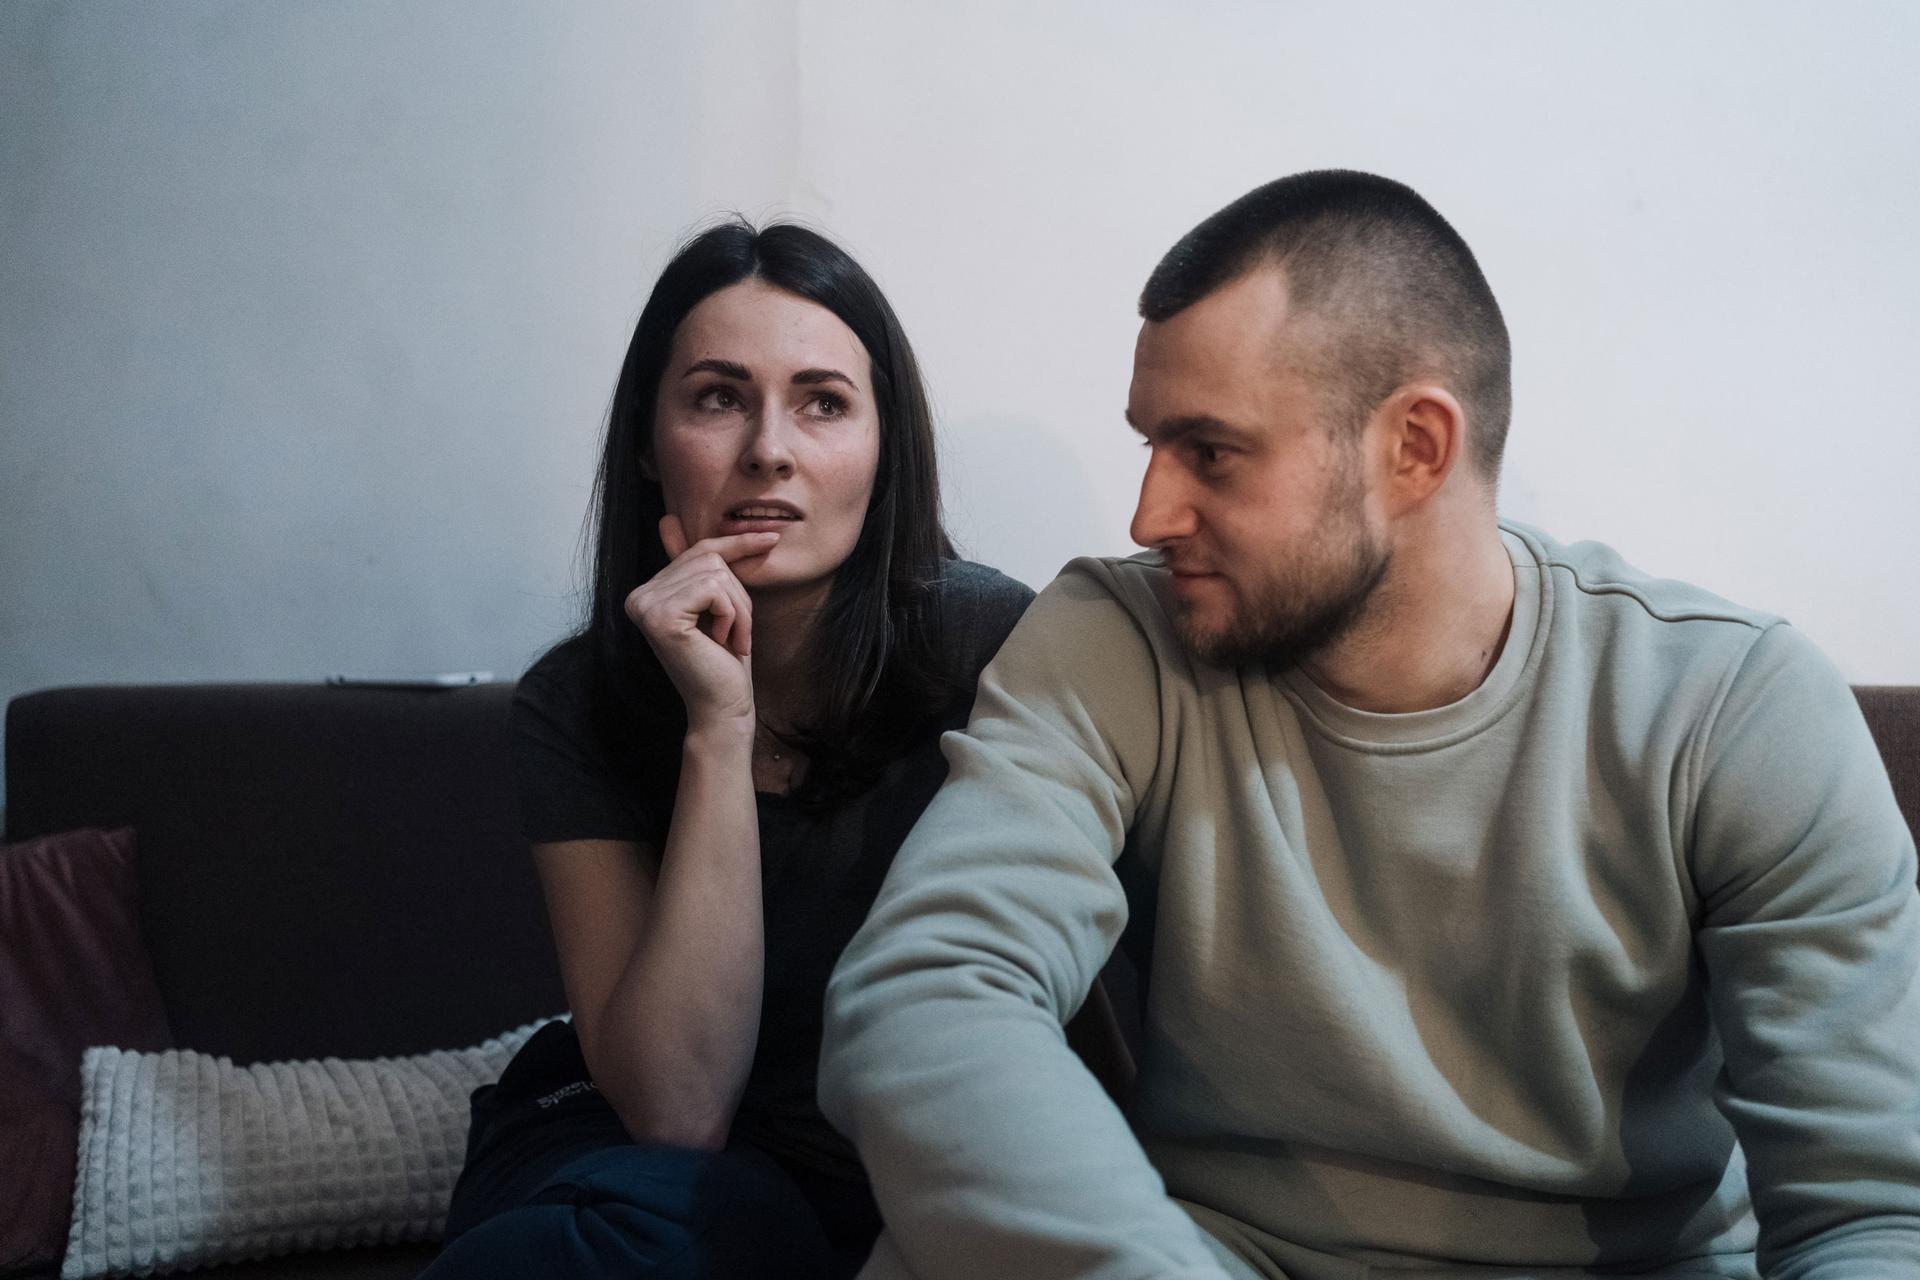 Alina Berezova and Stanislav Linevych, now a couple, talk about how they met on a dating app and moved in togethera after dating for six weeks amid war in Ukraine.